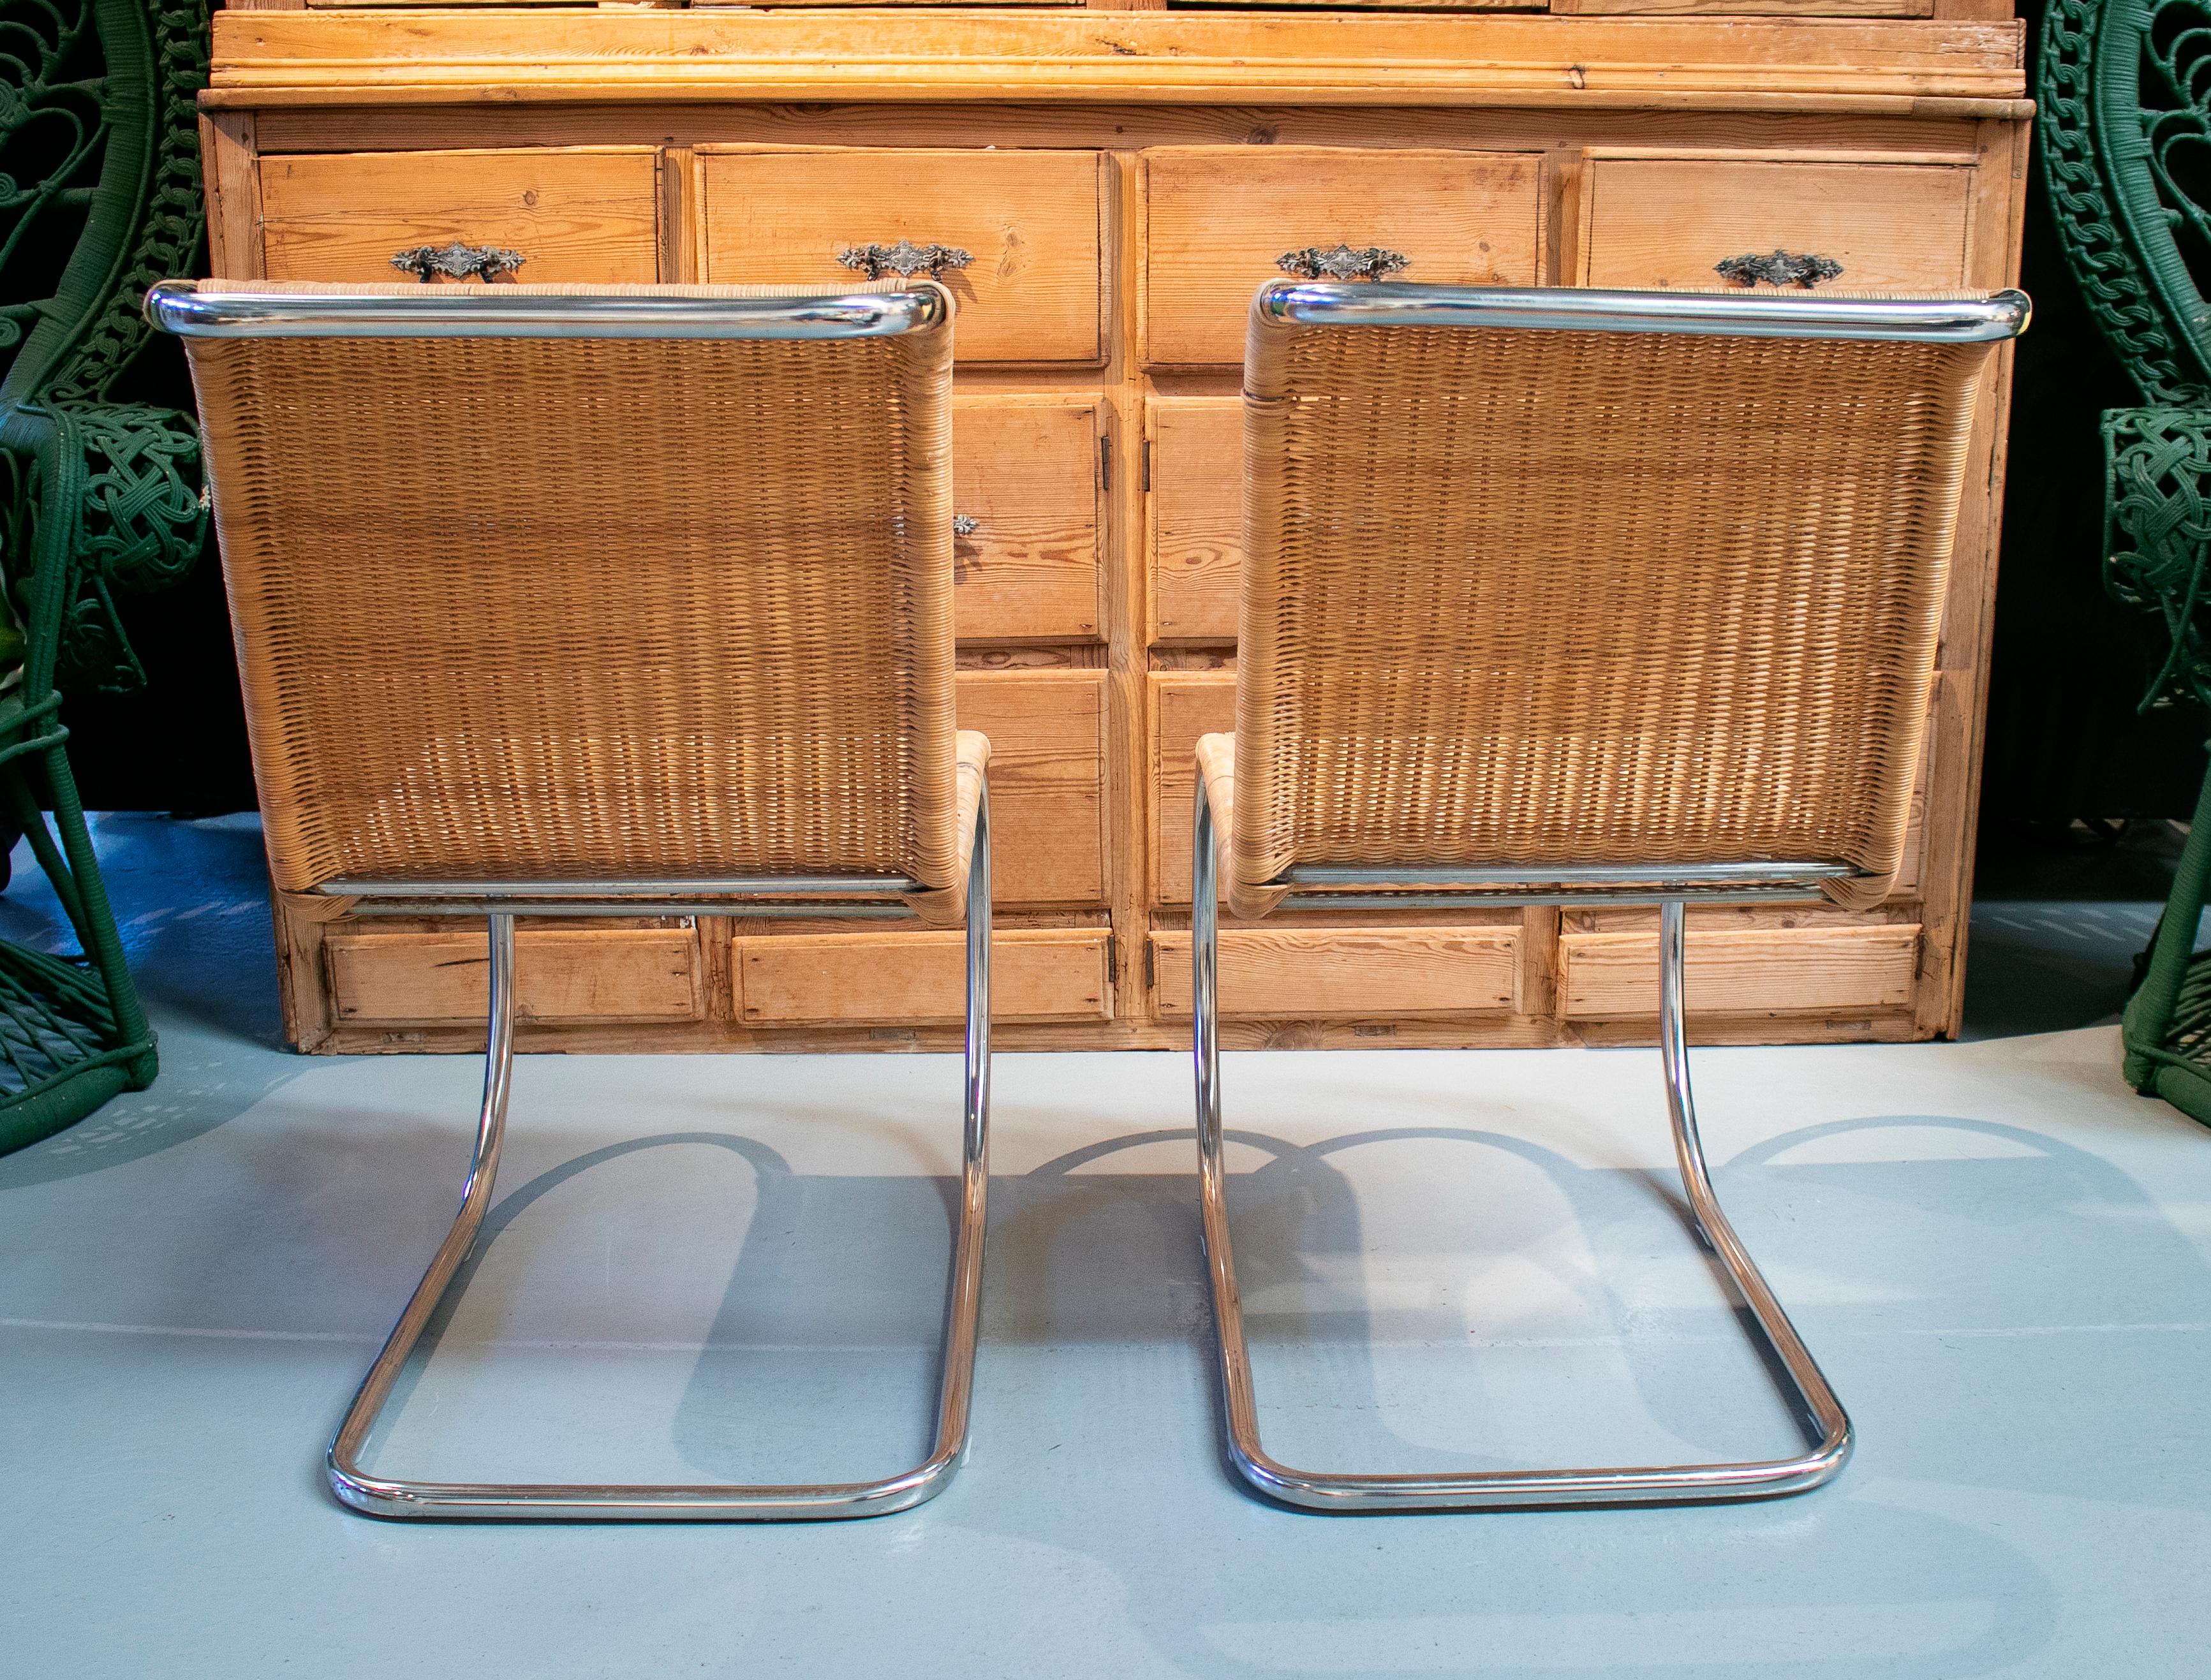 Stainless Steel 1970s Italian Designer Chairs with Steel Structure and Weaved Rattan